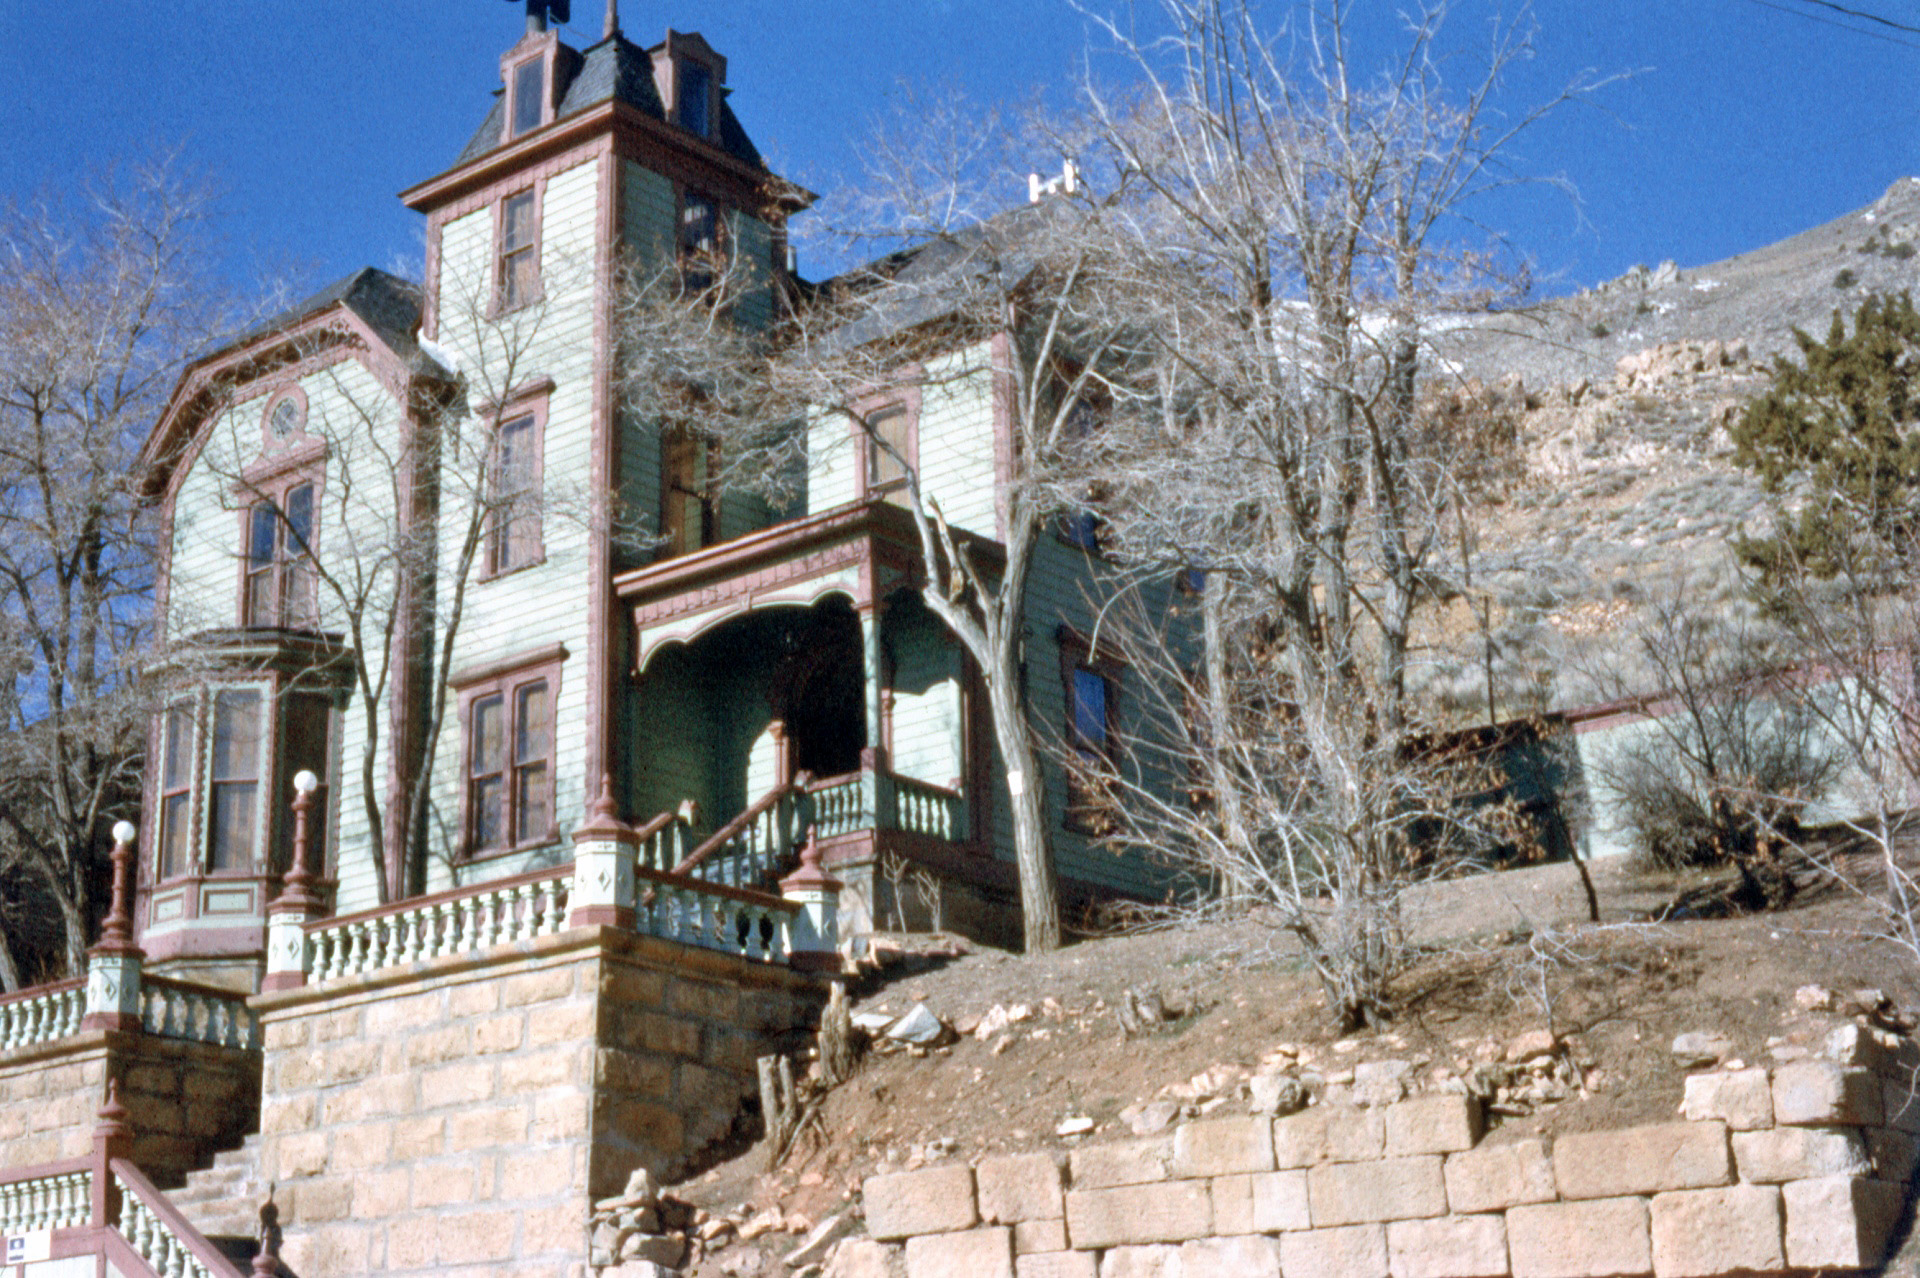 This old beauty was photographed on Anscochrome in 1959 at Virginia City, Nevada. It's hard to tell if it was abandoned when this photo was taken. View full size.